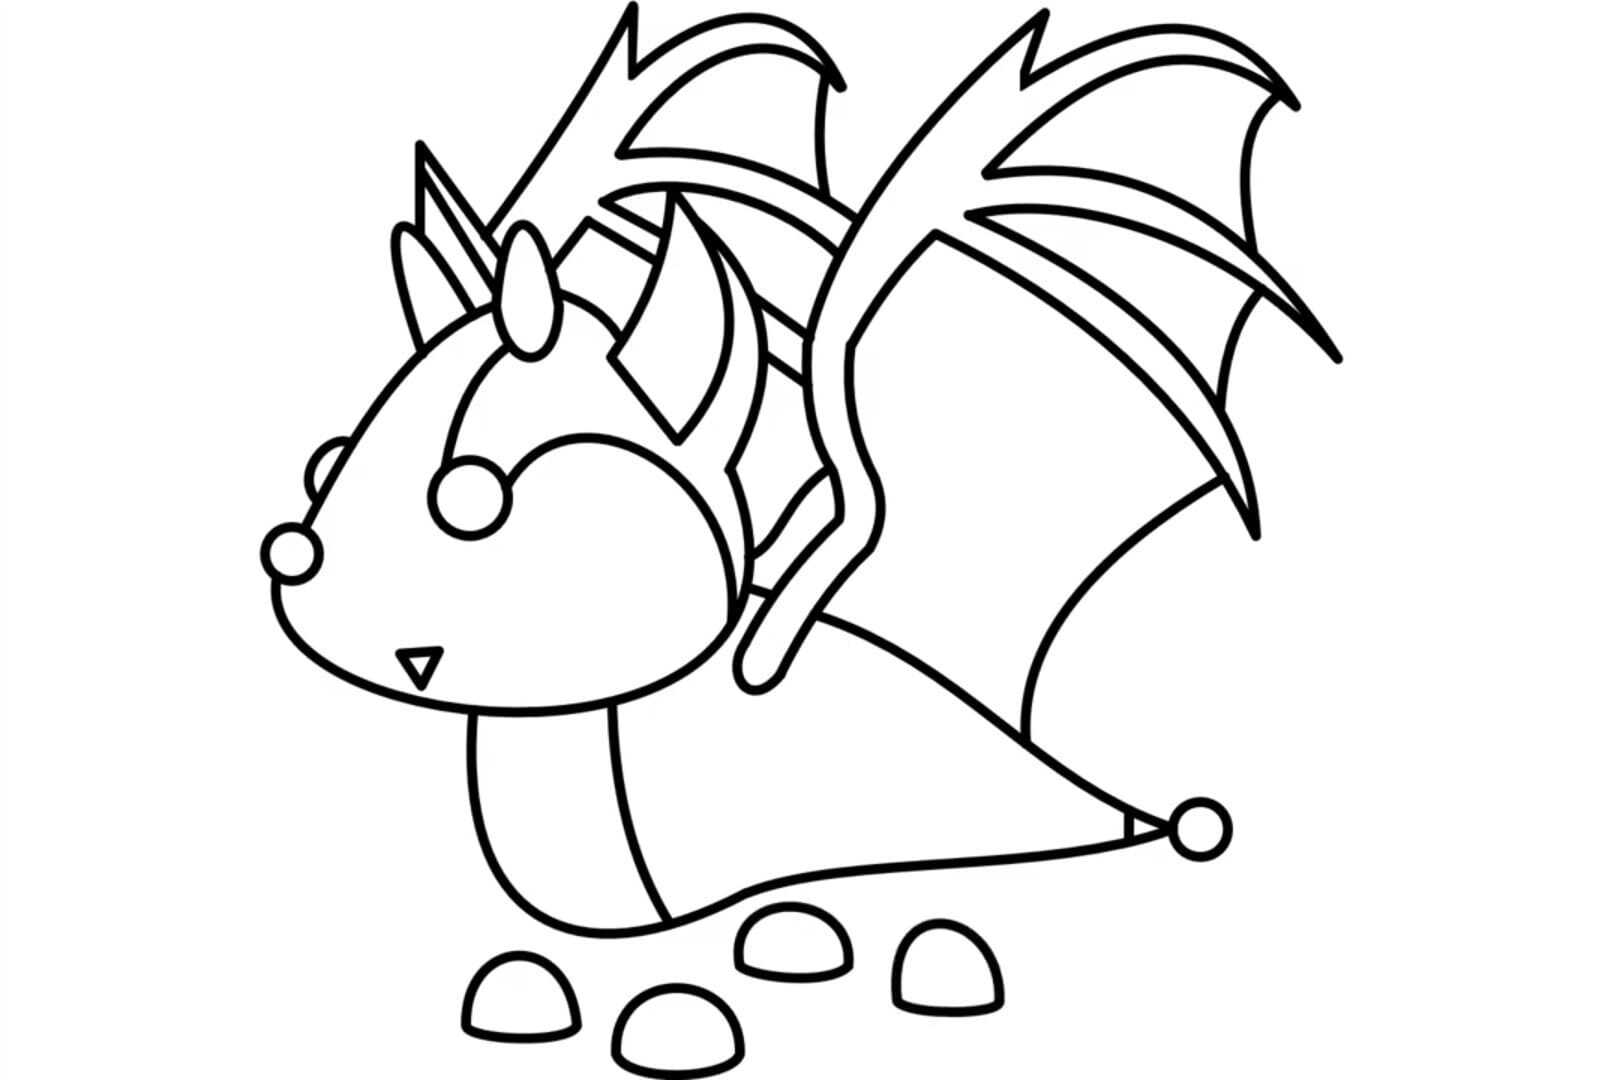 Bat dragon from Halloween event in Adopt me Coloring Page